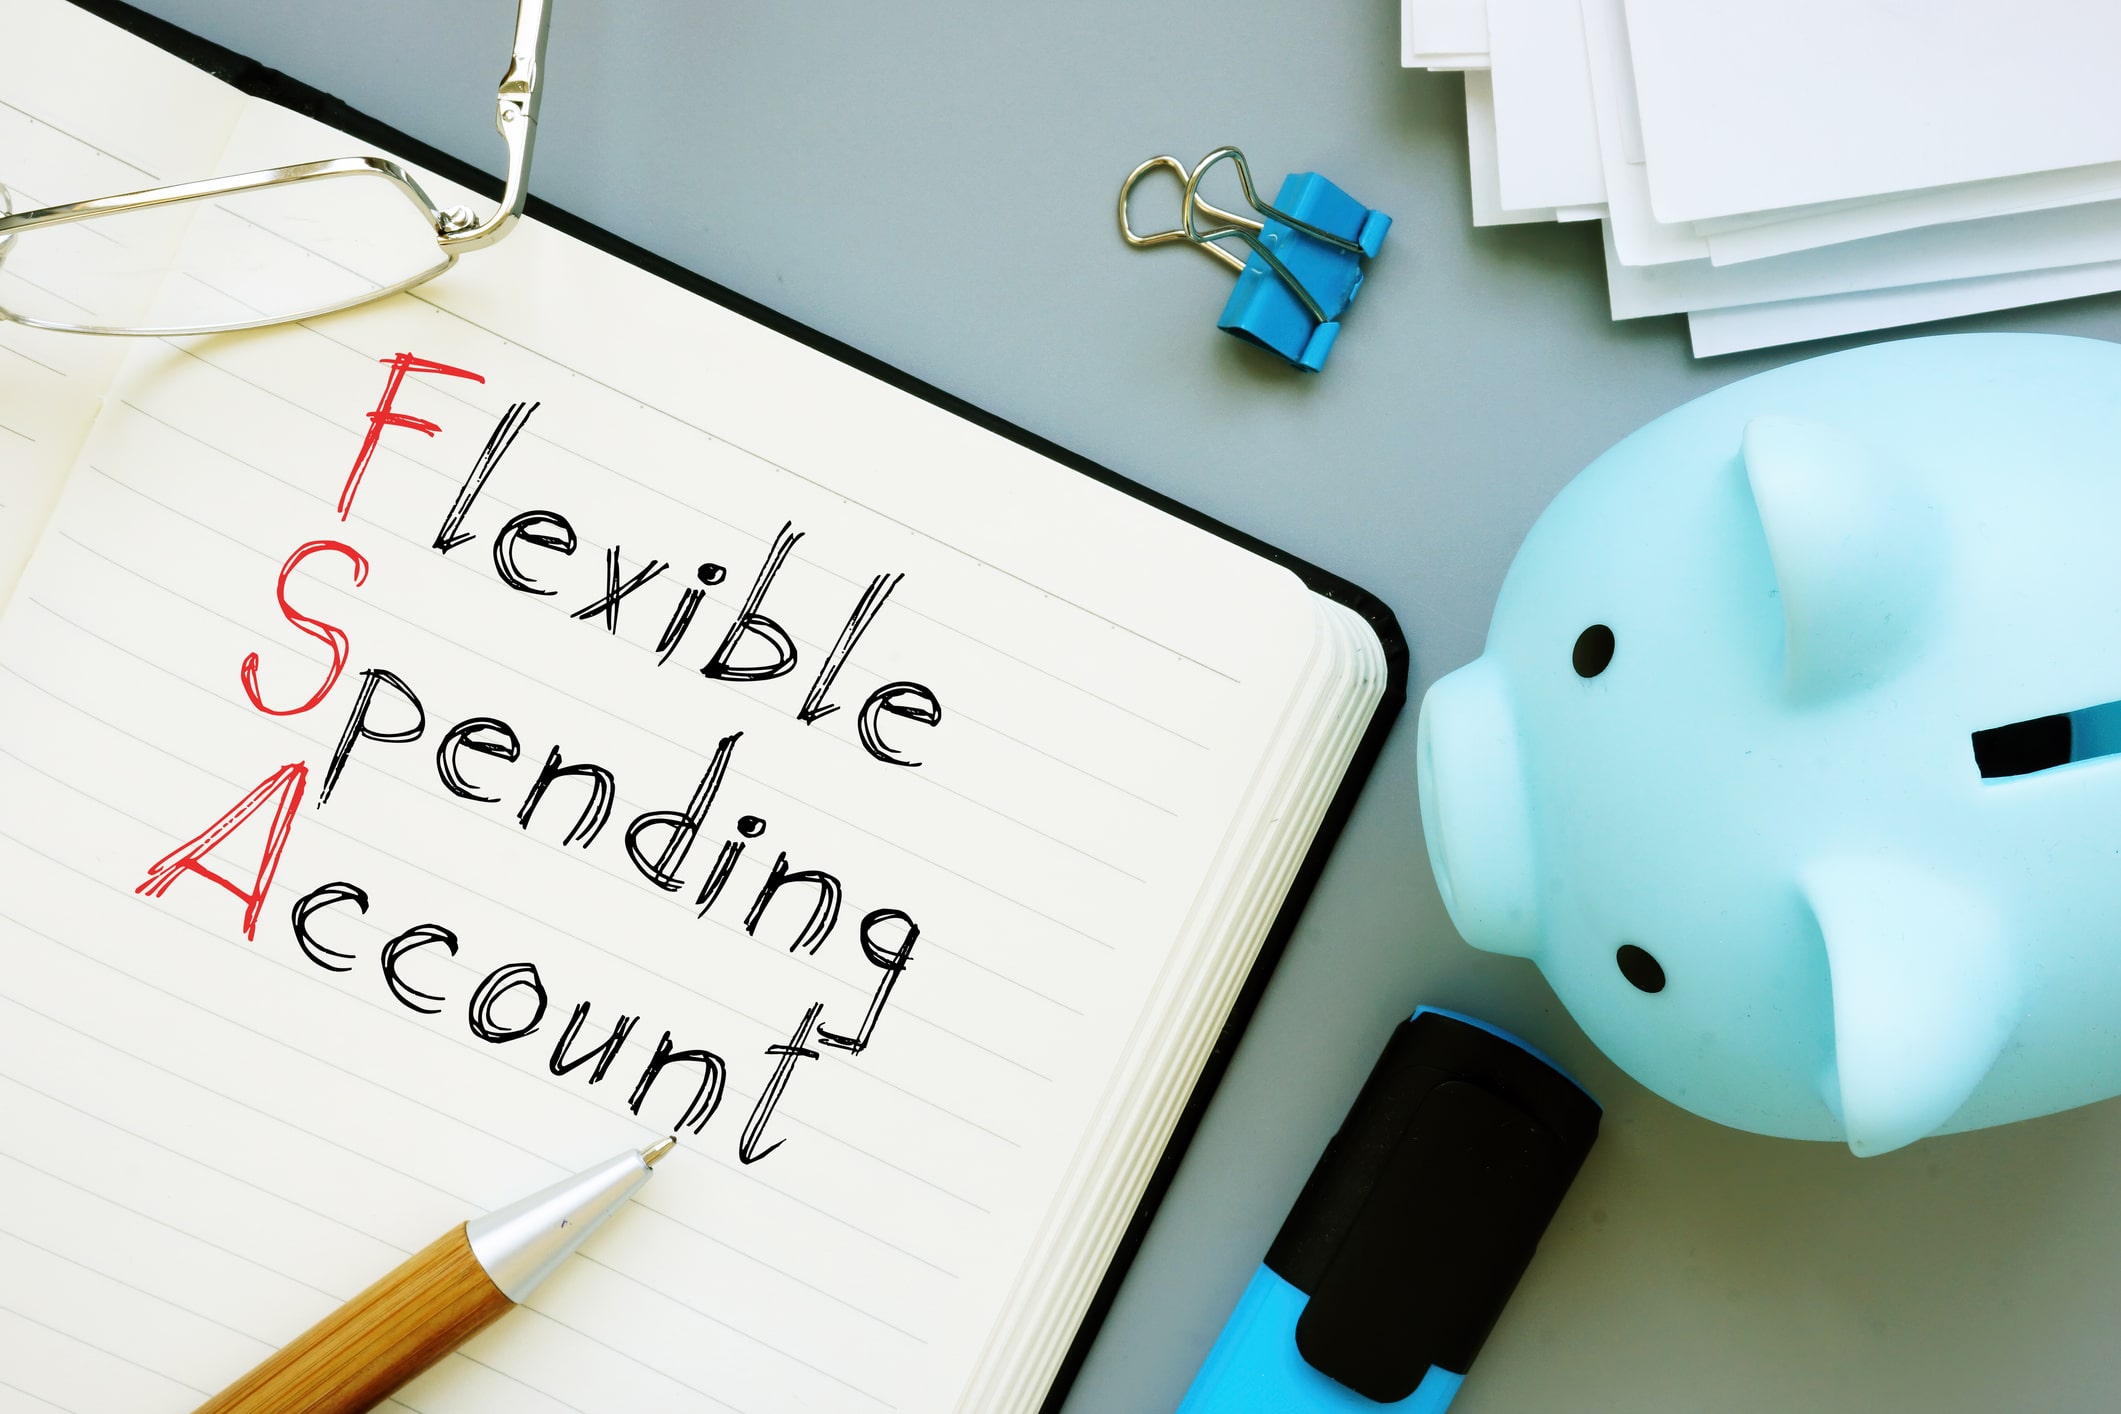 Flexible Spending Account FSA is shown on a conceptual business photo using the text